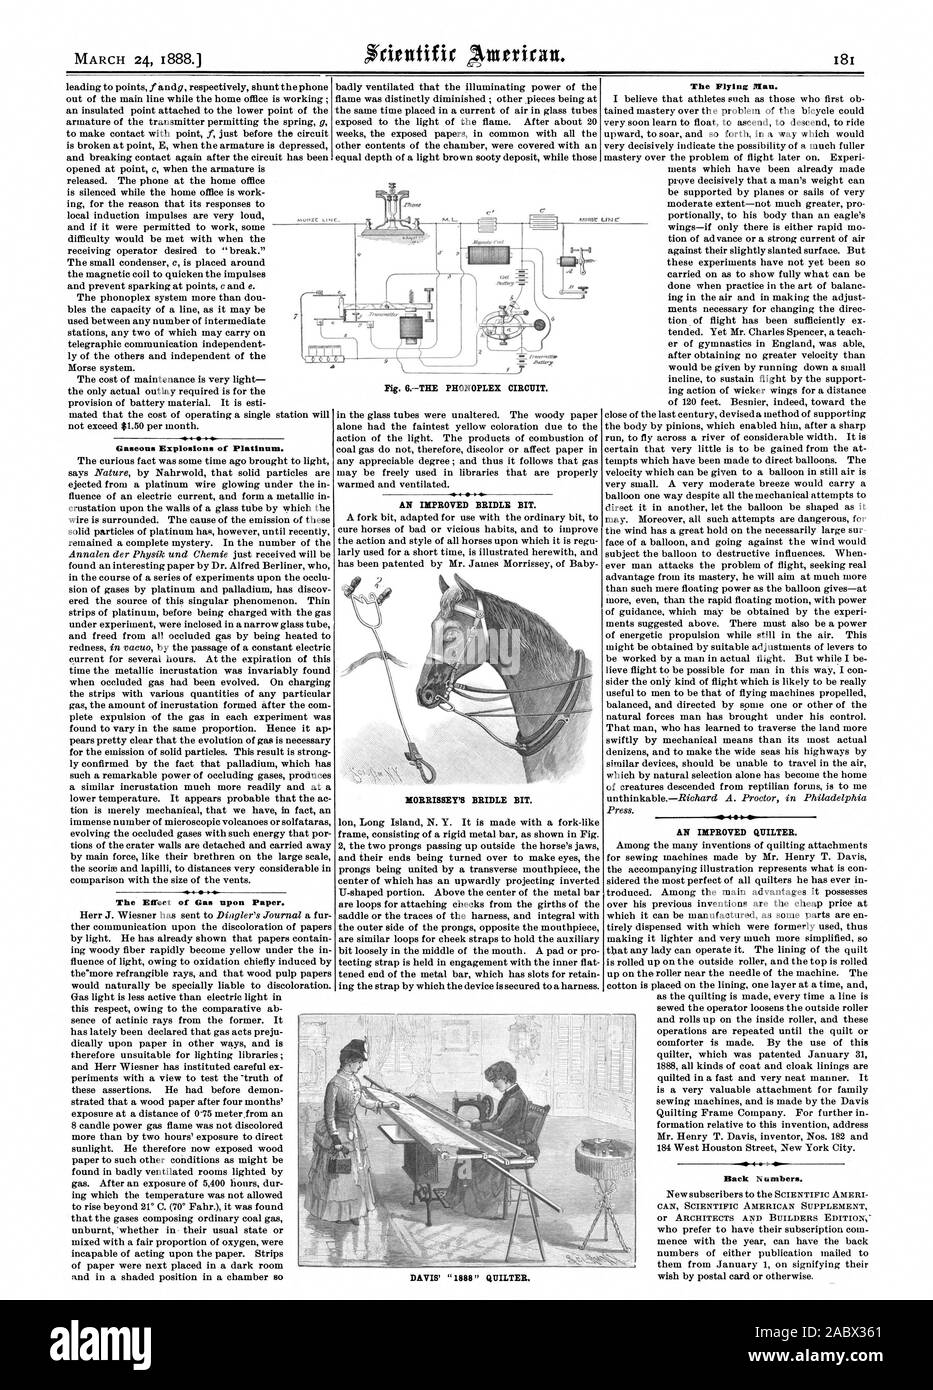 Gaseous Explosions of Platinum. The Effect of Gas upon Paper. AN IMPROVED BRIDLE BIT. MORRISSEY'S BRIDLE BIT. The Plying Mau. AN IMPROVED QUILTER. M. L. .1' 9 age Fig. 6THE PHONOPLEX CIRCUIT. DAVIS' '1888' QUILTER. Back Numbers., scientific american, 1888-03-24 Stock Photo